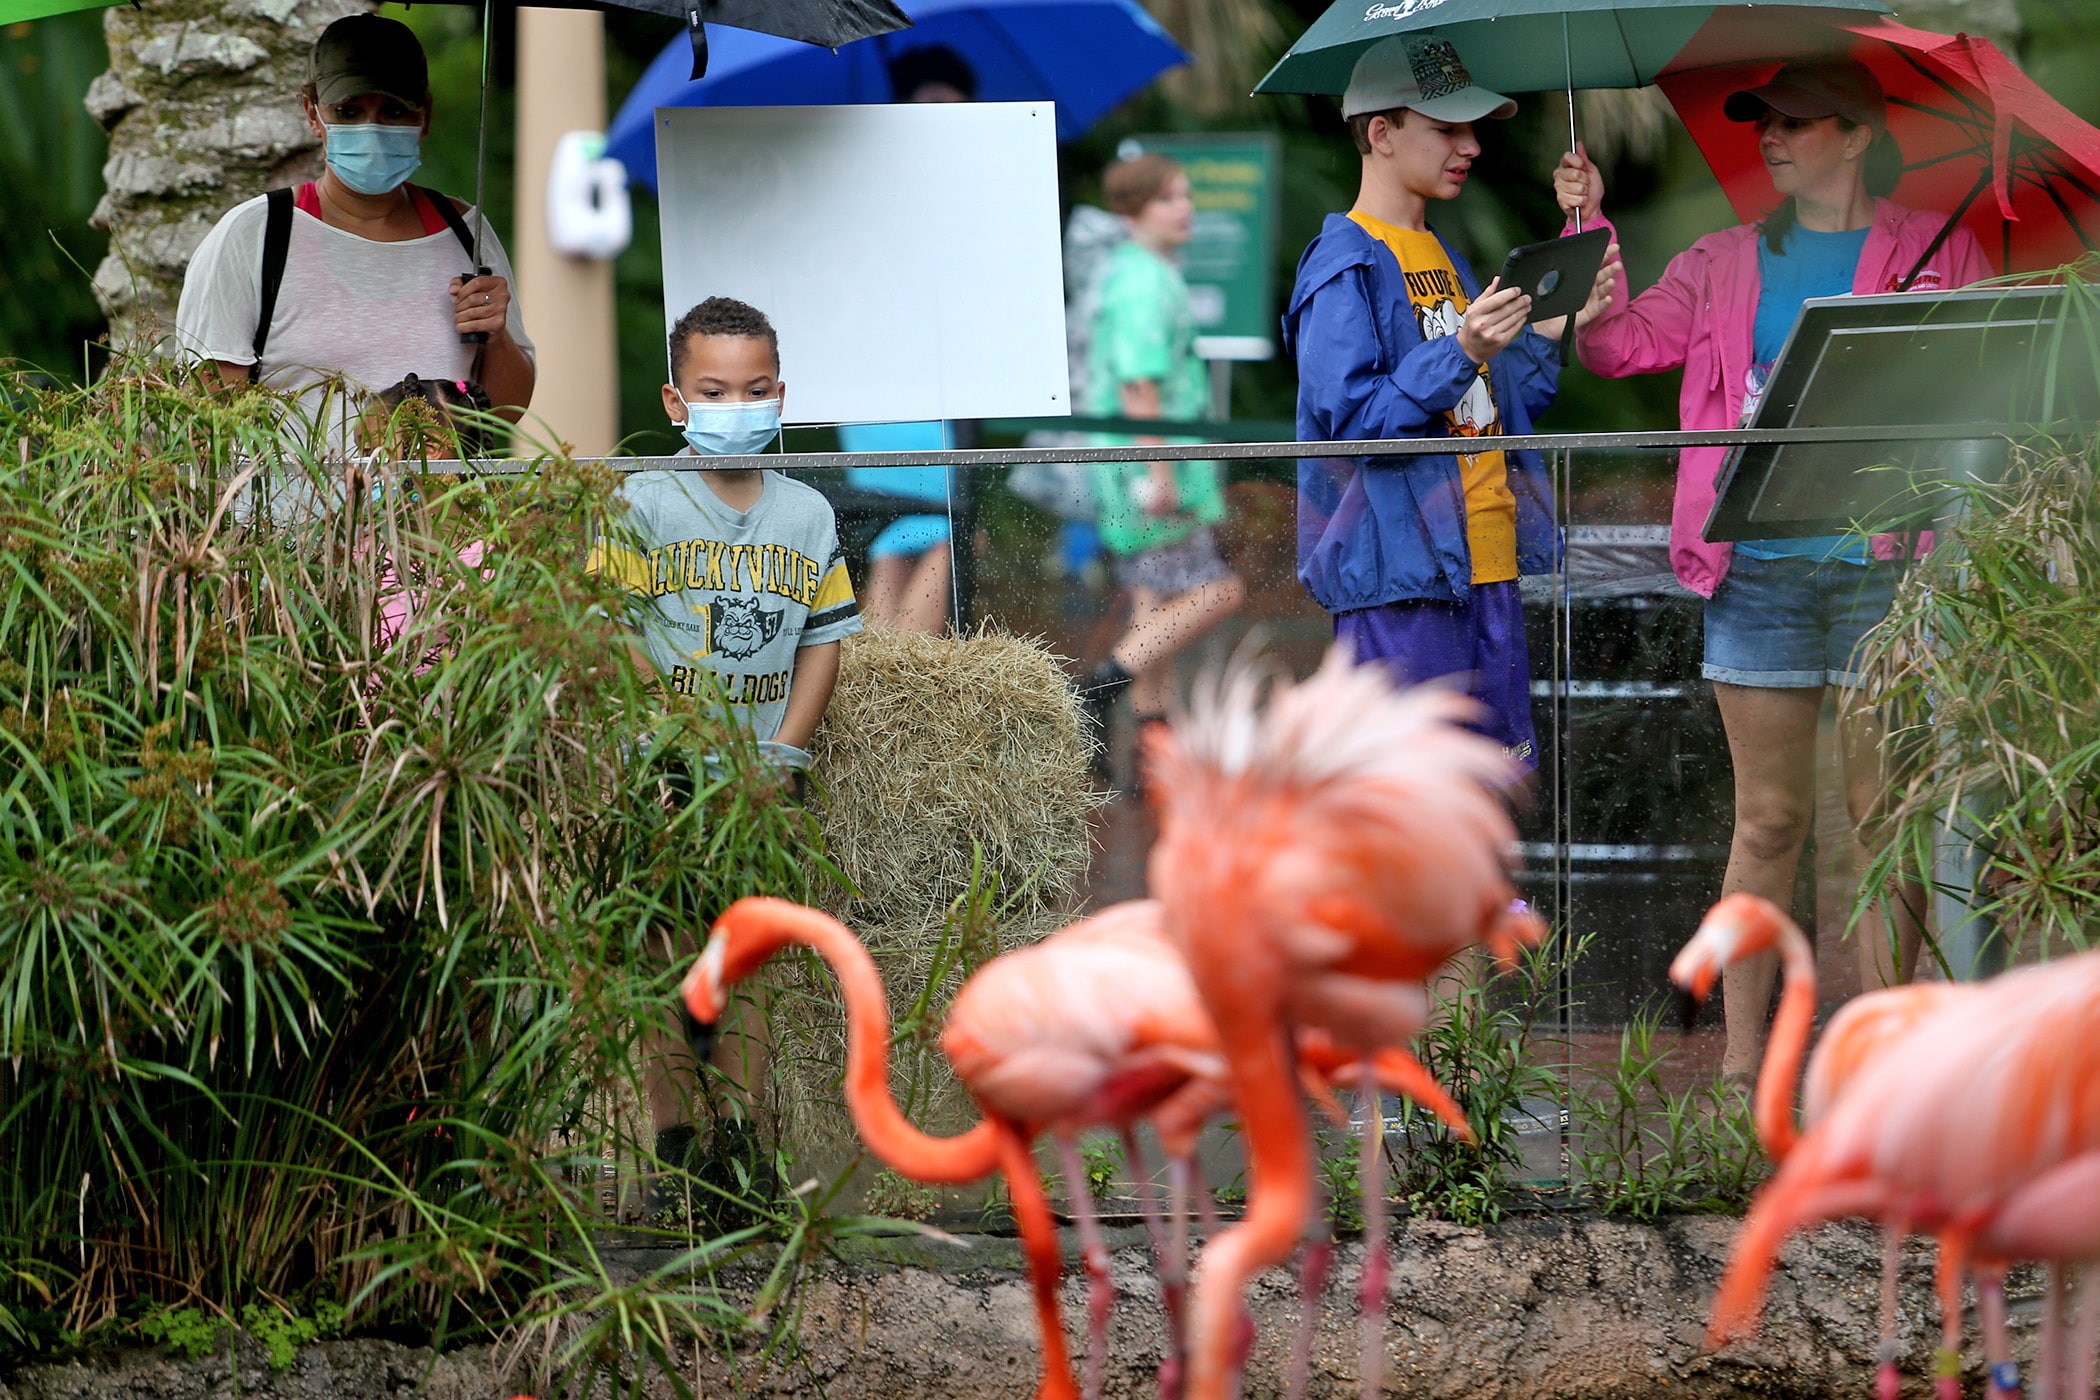 Akai Bartholomew, 6, and his mother Nicole (L) watch the flamingos as the Audubon Zoo re-opens on a limited basis on Wednesday, June 3, 2020. (Photo by Michael DeMocker)